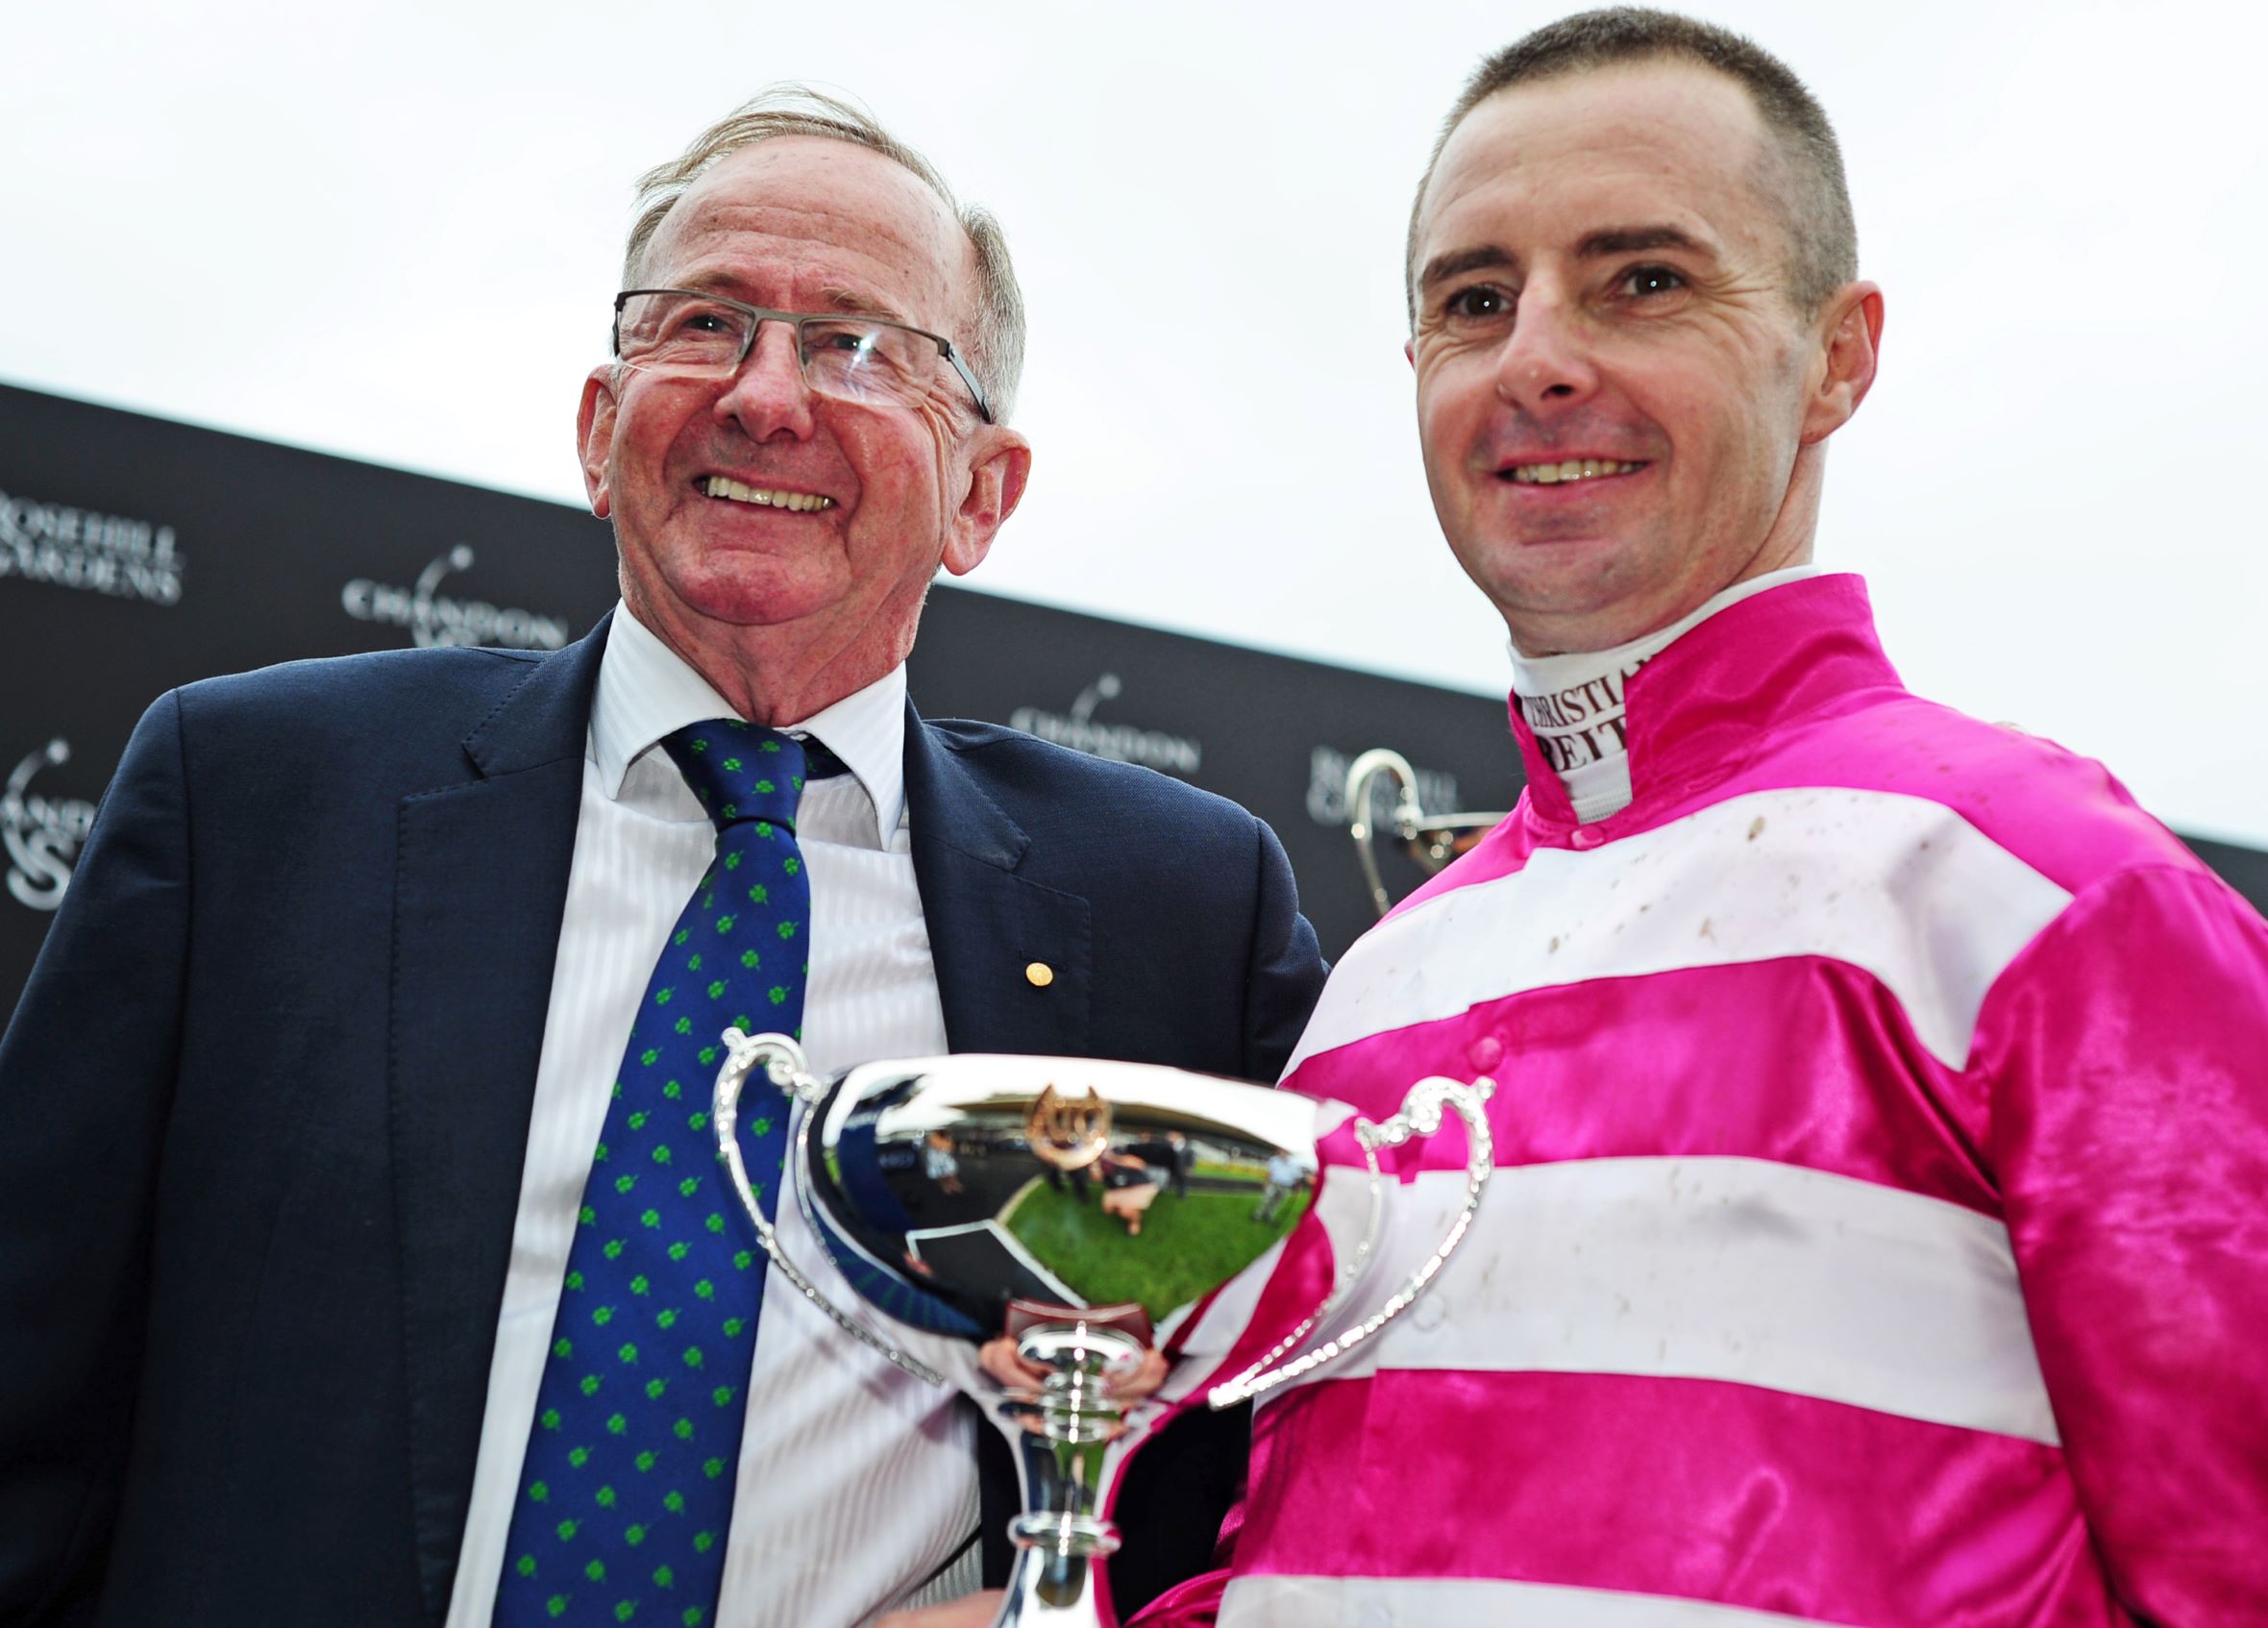 Trainer Ron Quinton and jockey Christian Reith after winning the Group One Coolmore Classic